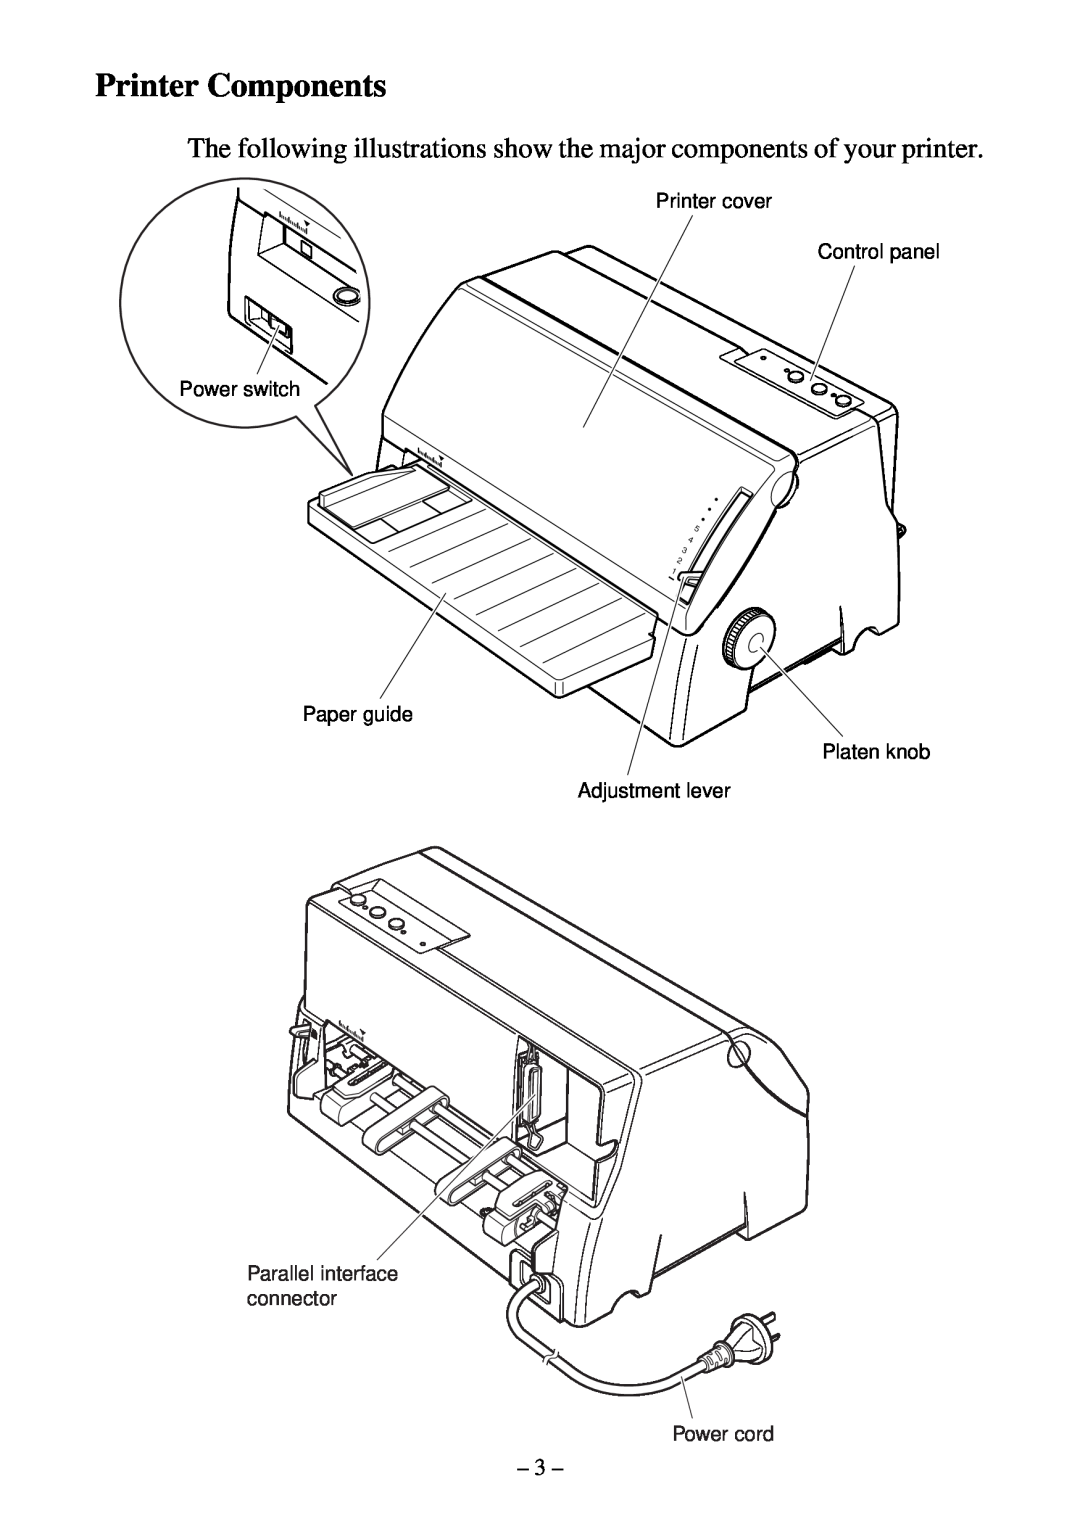 Star Micronics LC-500 Printer Components, The following illustrations show the major components of your printer, 5 4 3 2 